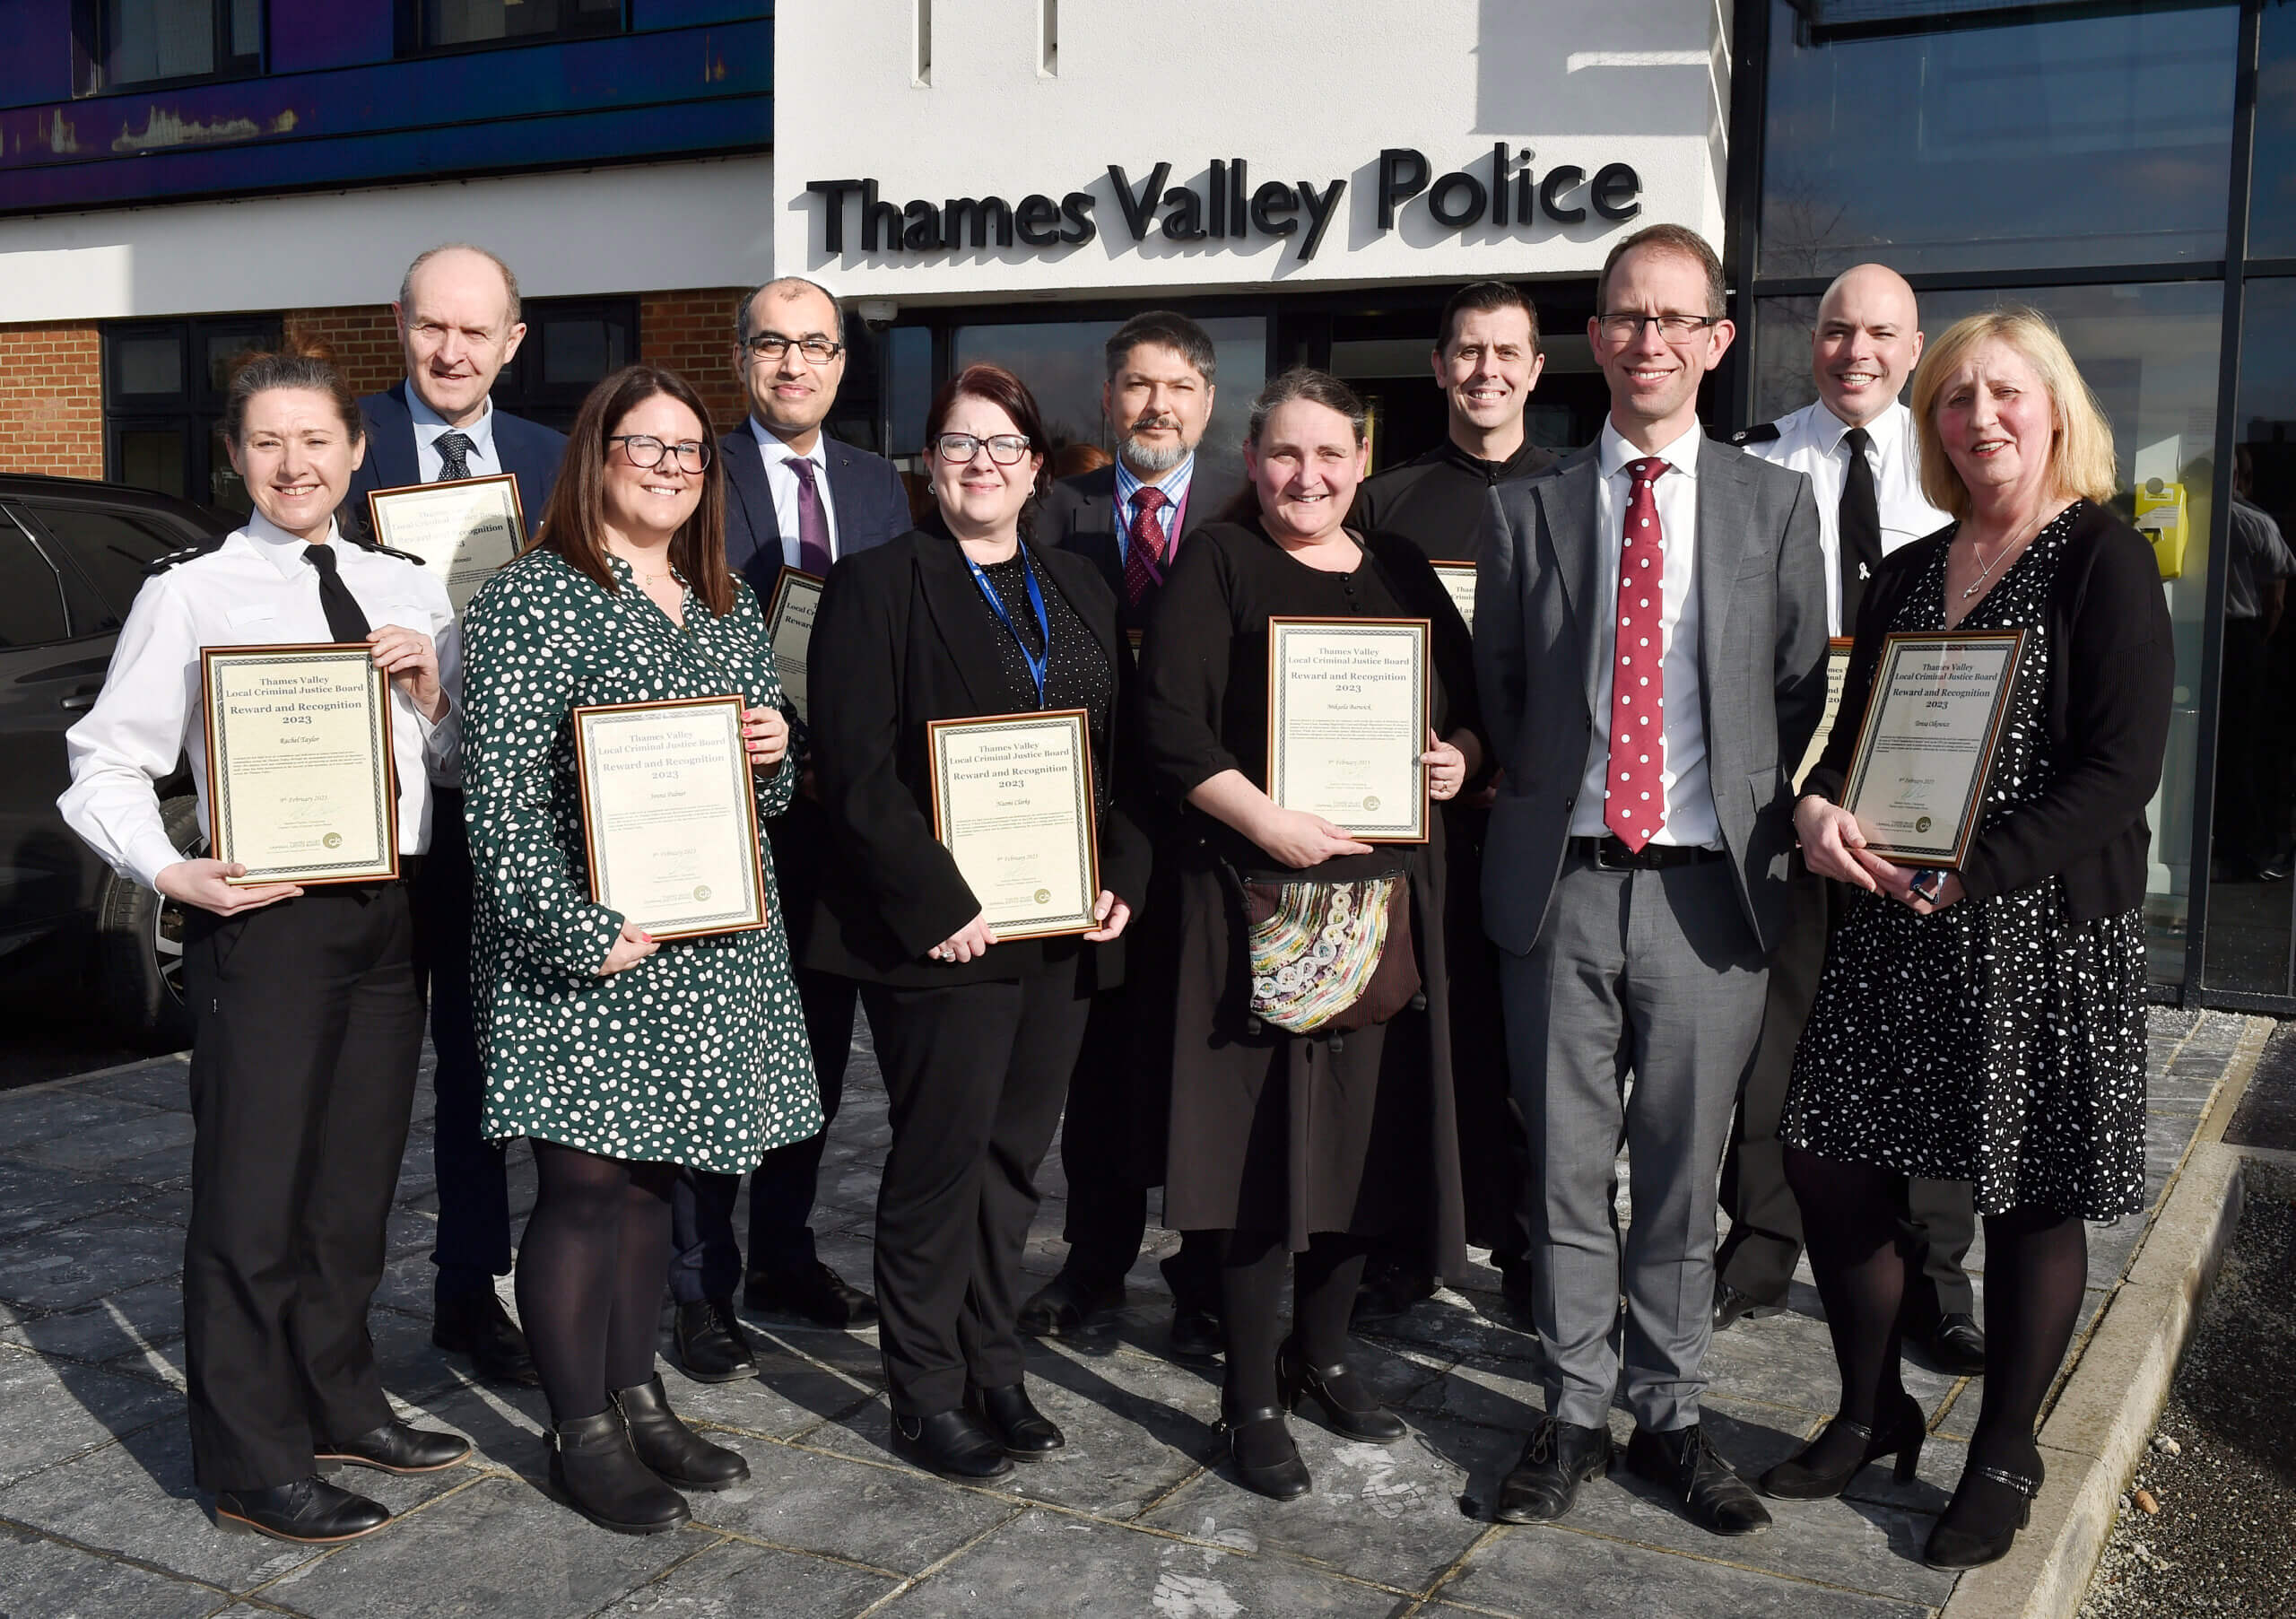 Staff outside with commendations